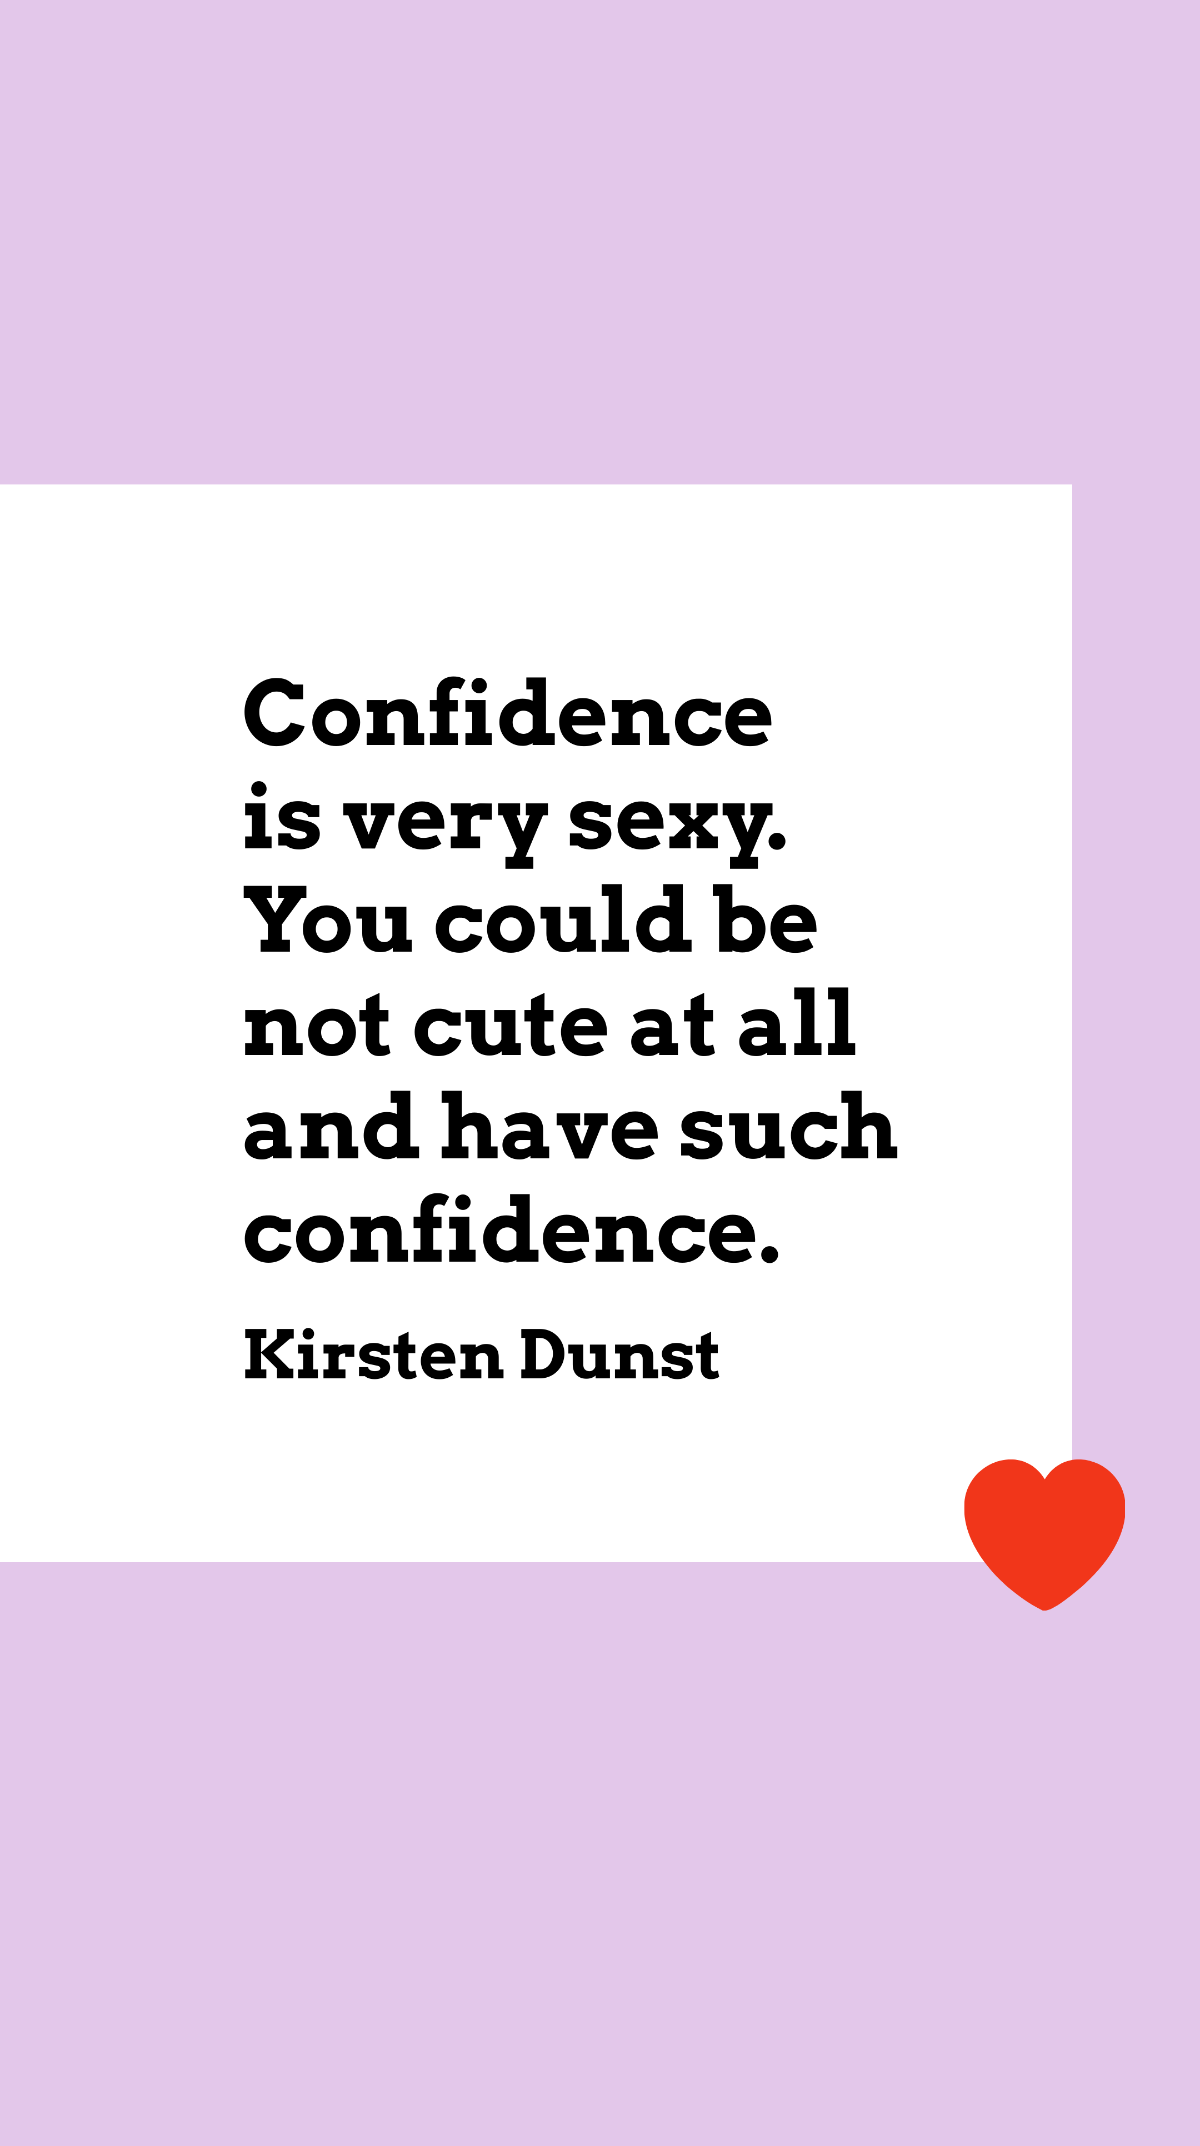 Free Kirsten Dunst - Confidence is very sexy. You could be not cute at all and have such confidence. Template